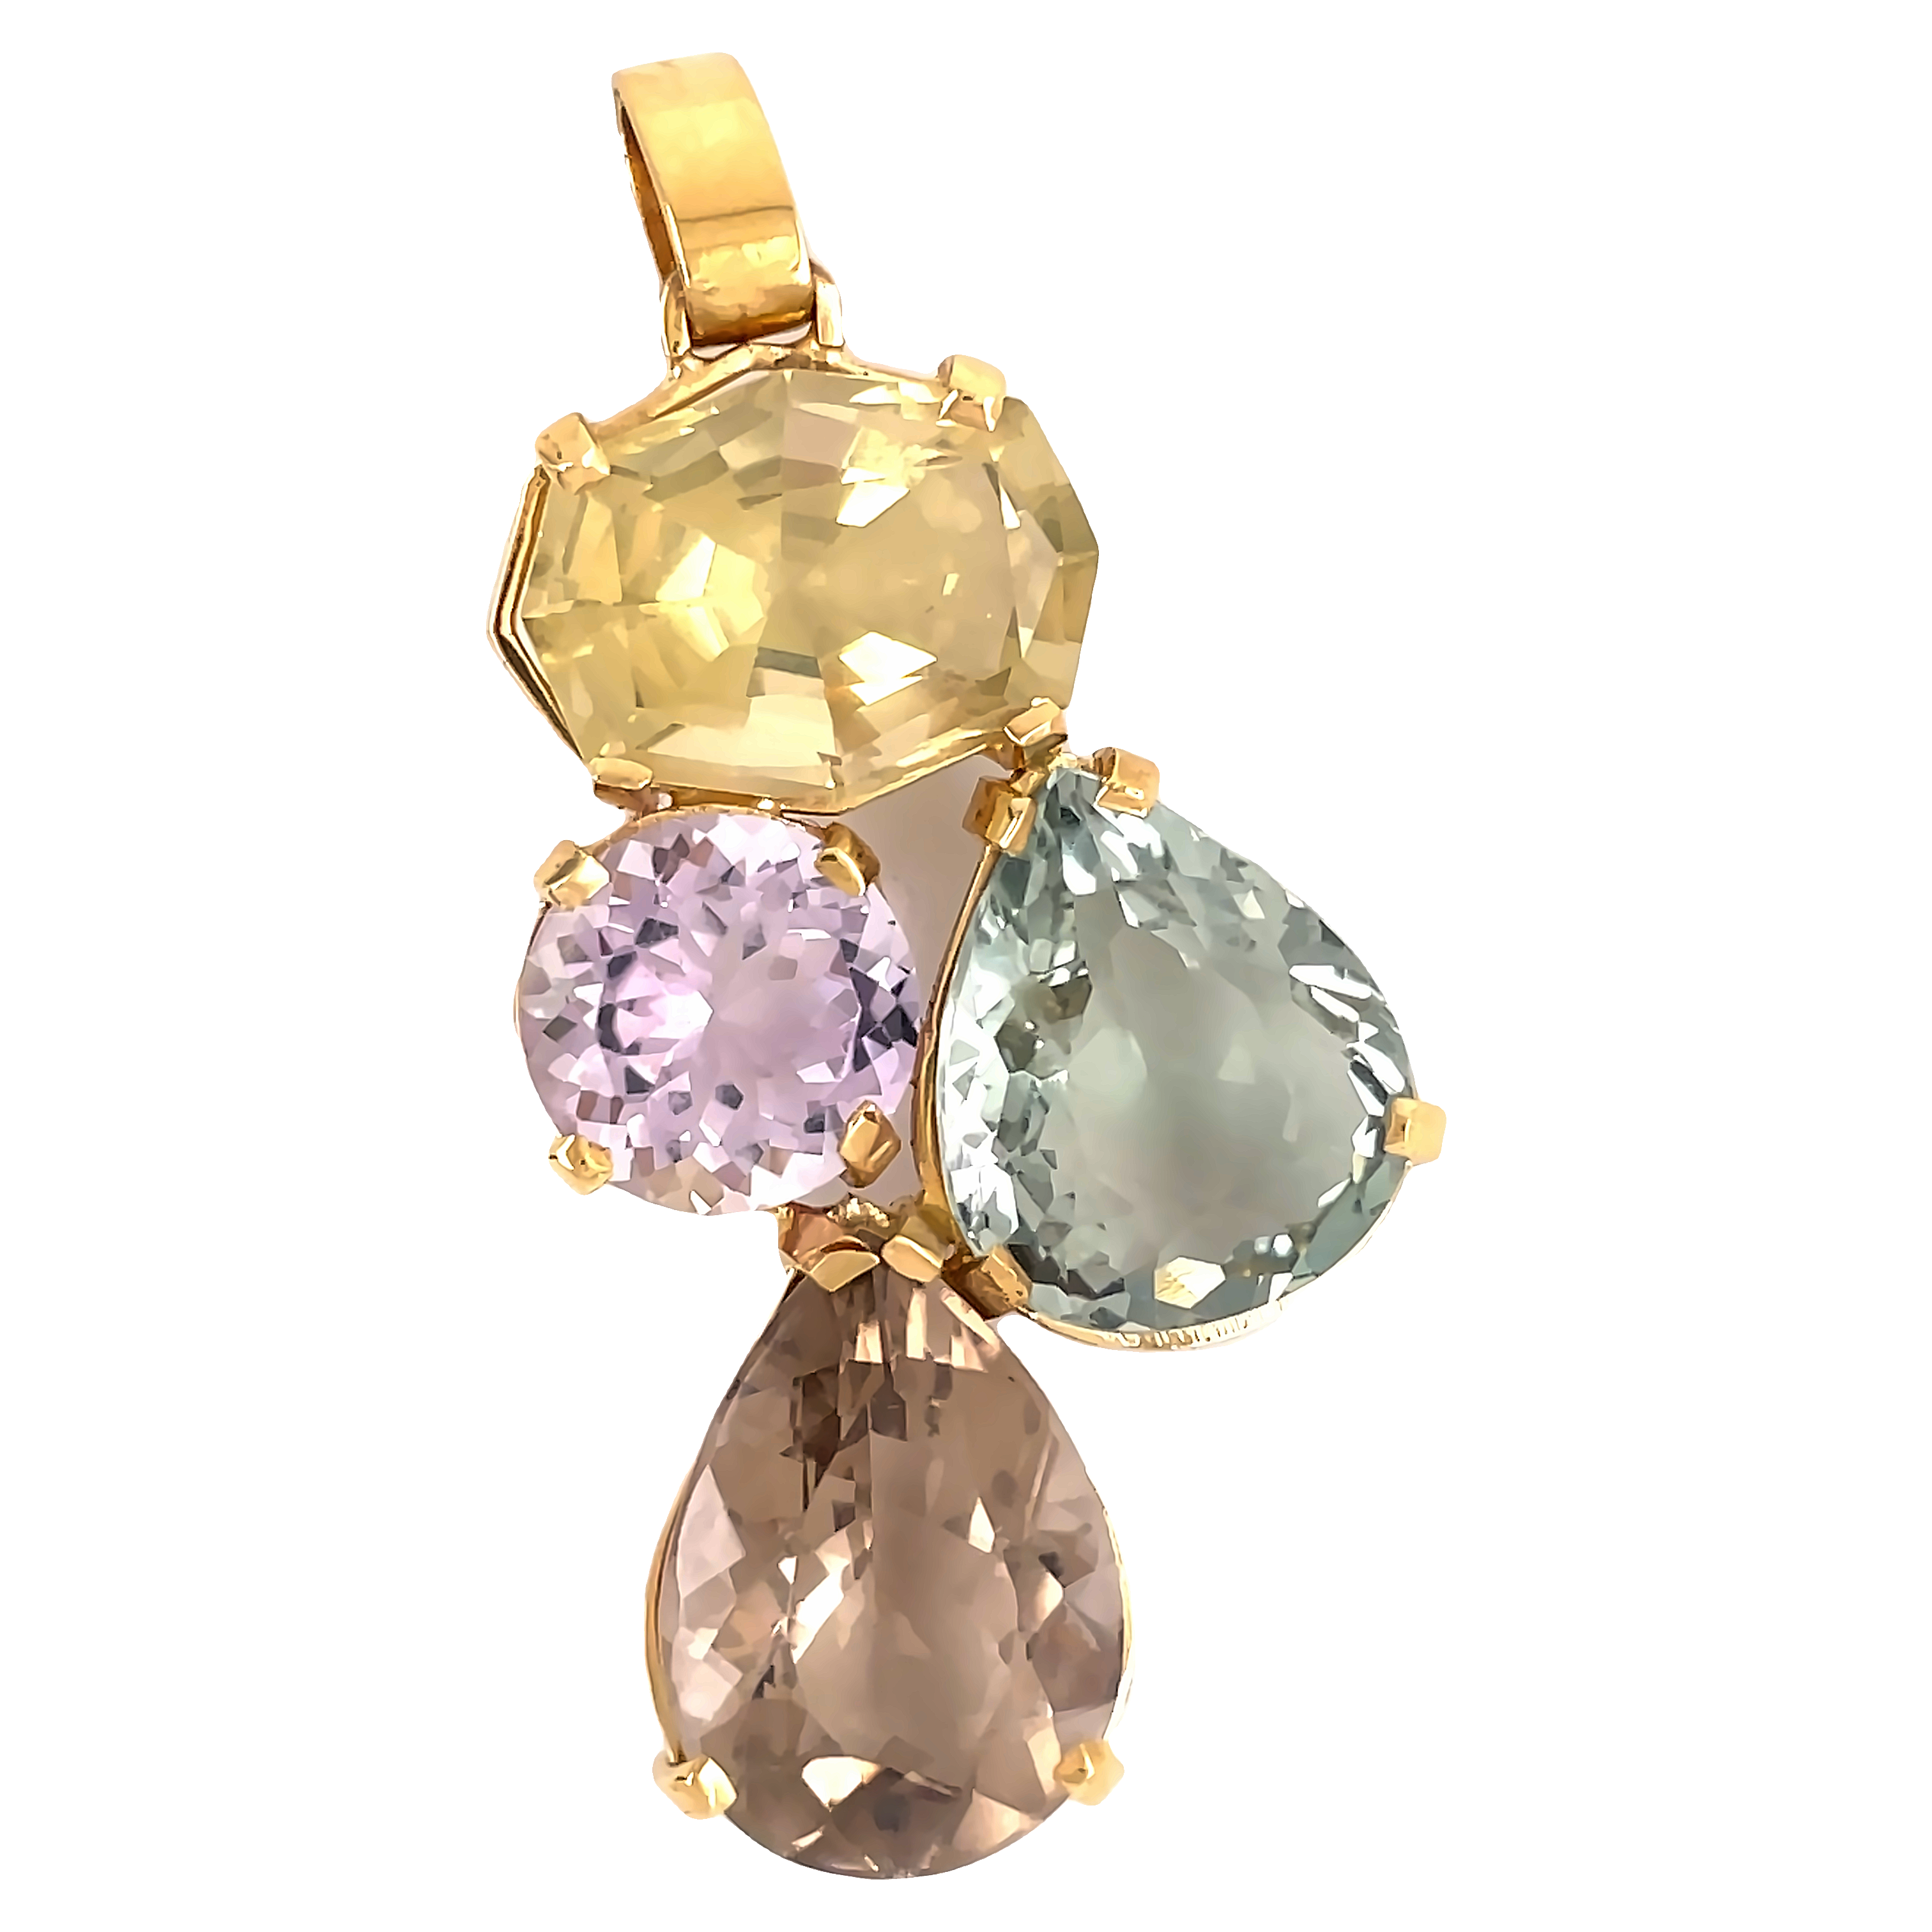 This stunning 14k yellow gold pendant features an eye-catching combination of Citrine, Amethyst, Brown Topaz, and Prazolite gems. Show off unique style and enduring elegance with this timeless design.